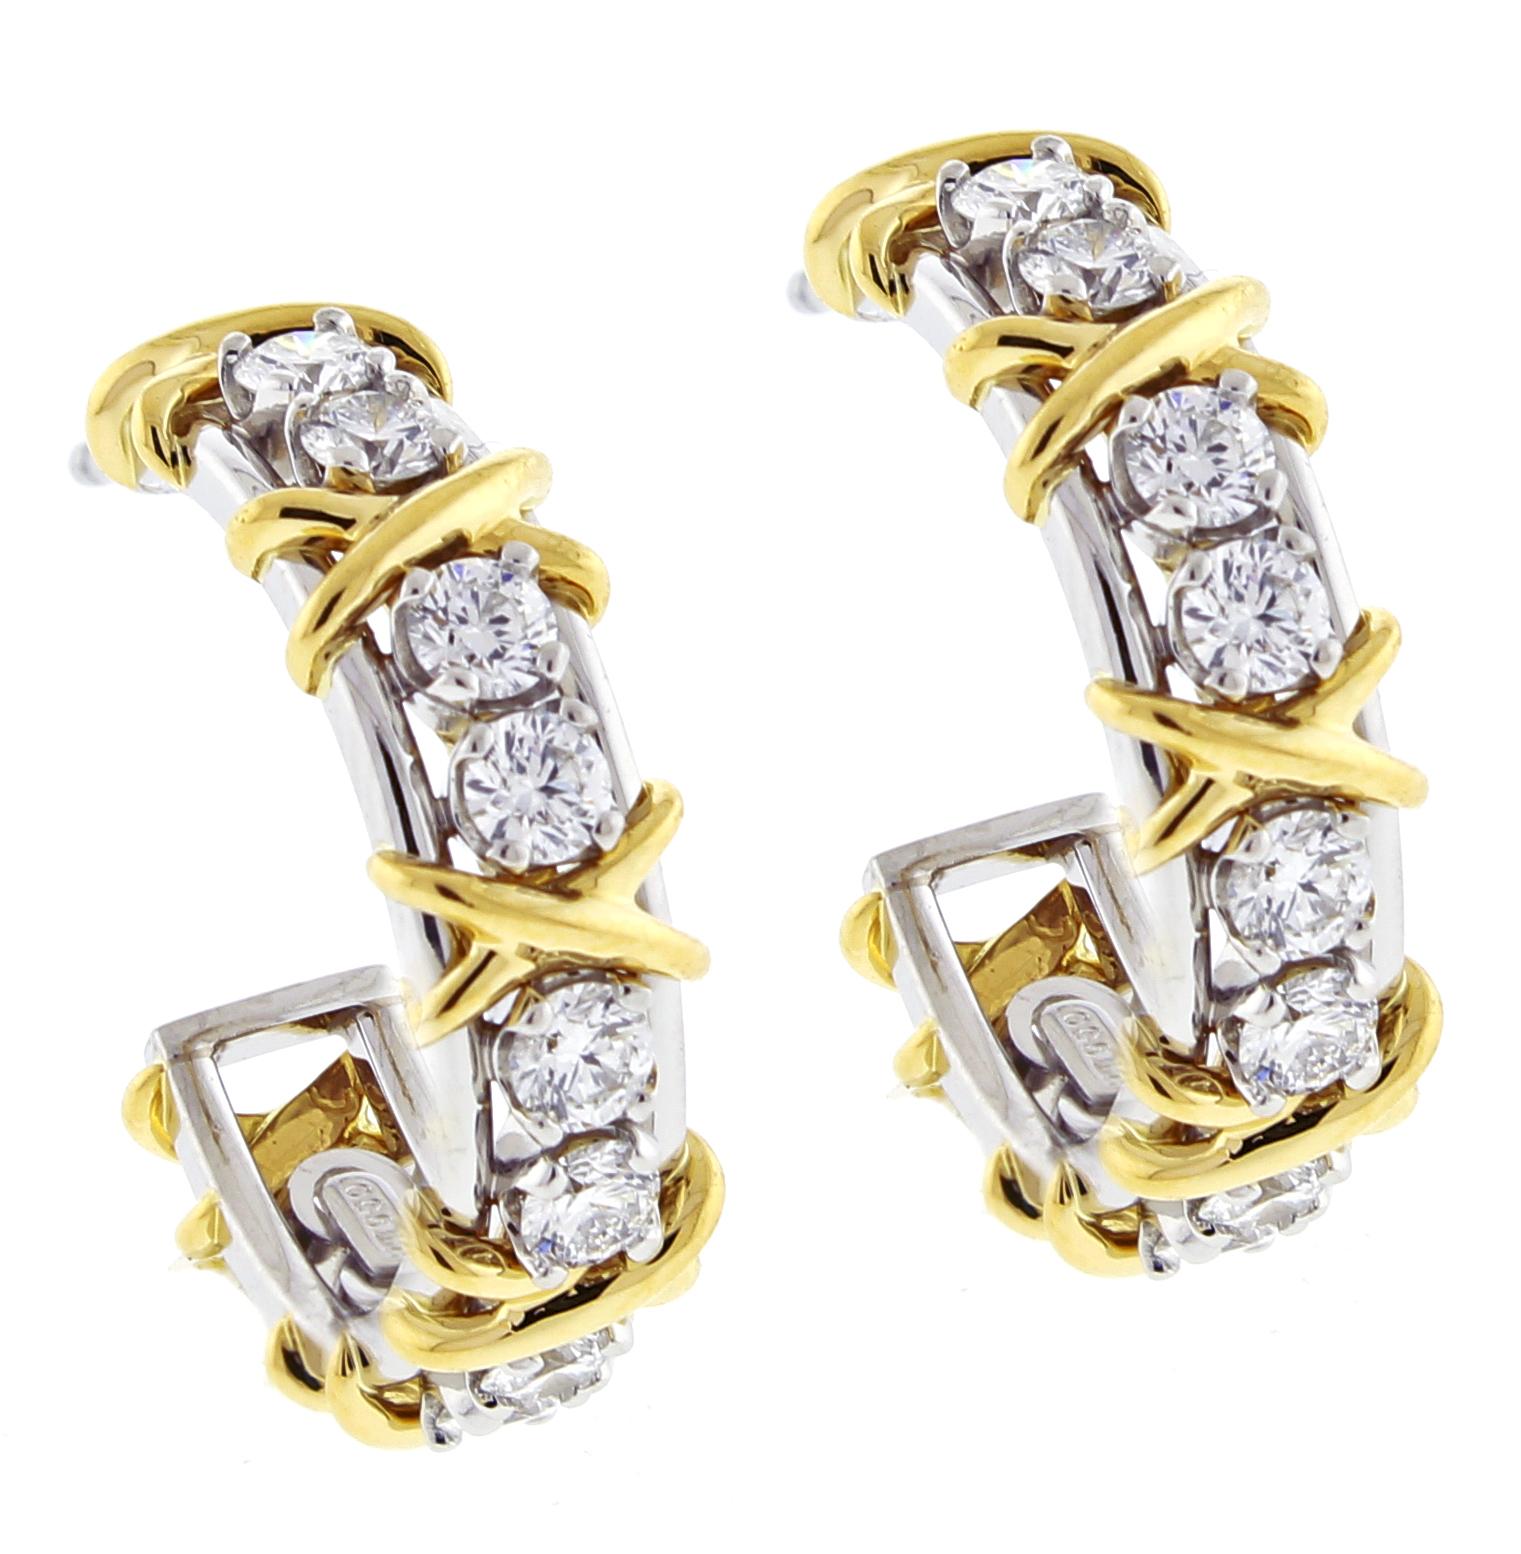 Jean Schlumberger’s visionary creations are among the world’s most intricate designs. Blazing diamonds topped by golden X's create these glamorous earrings.

♦ Designer:  Schlumberger
♦ Retail $16,000
♦ Metal: 18 karat and platinum
♦ 20 diamonds =